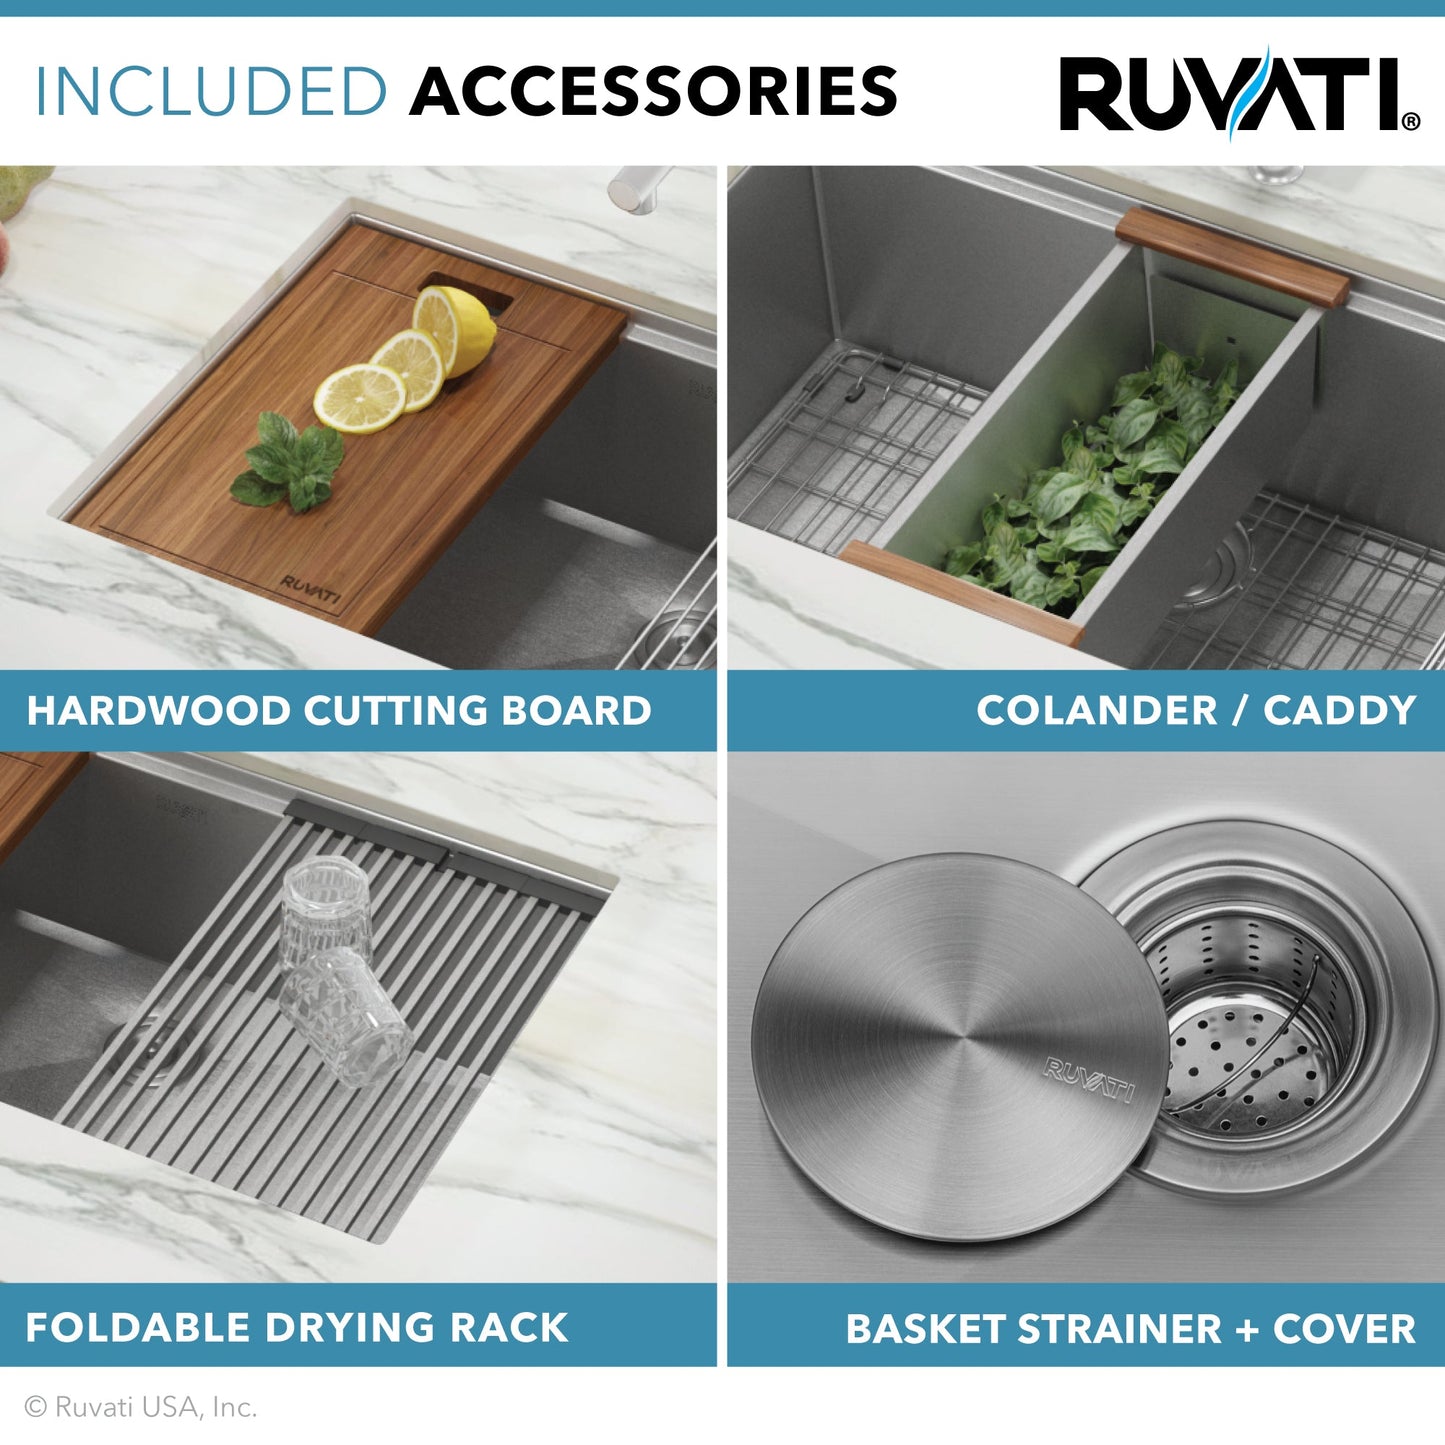 Ruvati Roma Pro 33" x 19" Undermount Stainless Steel Tight Radius Double Bowl 50/50 Workstation Sink With Bottom Rinse Grid and Drain Assembly